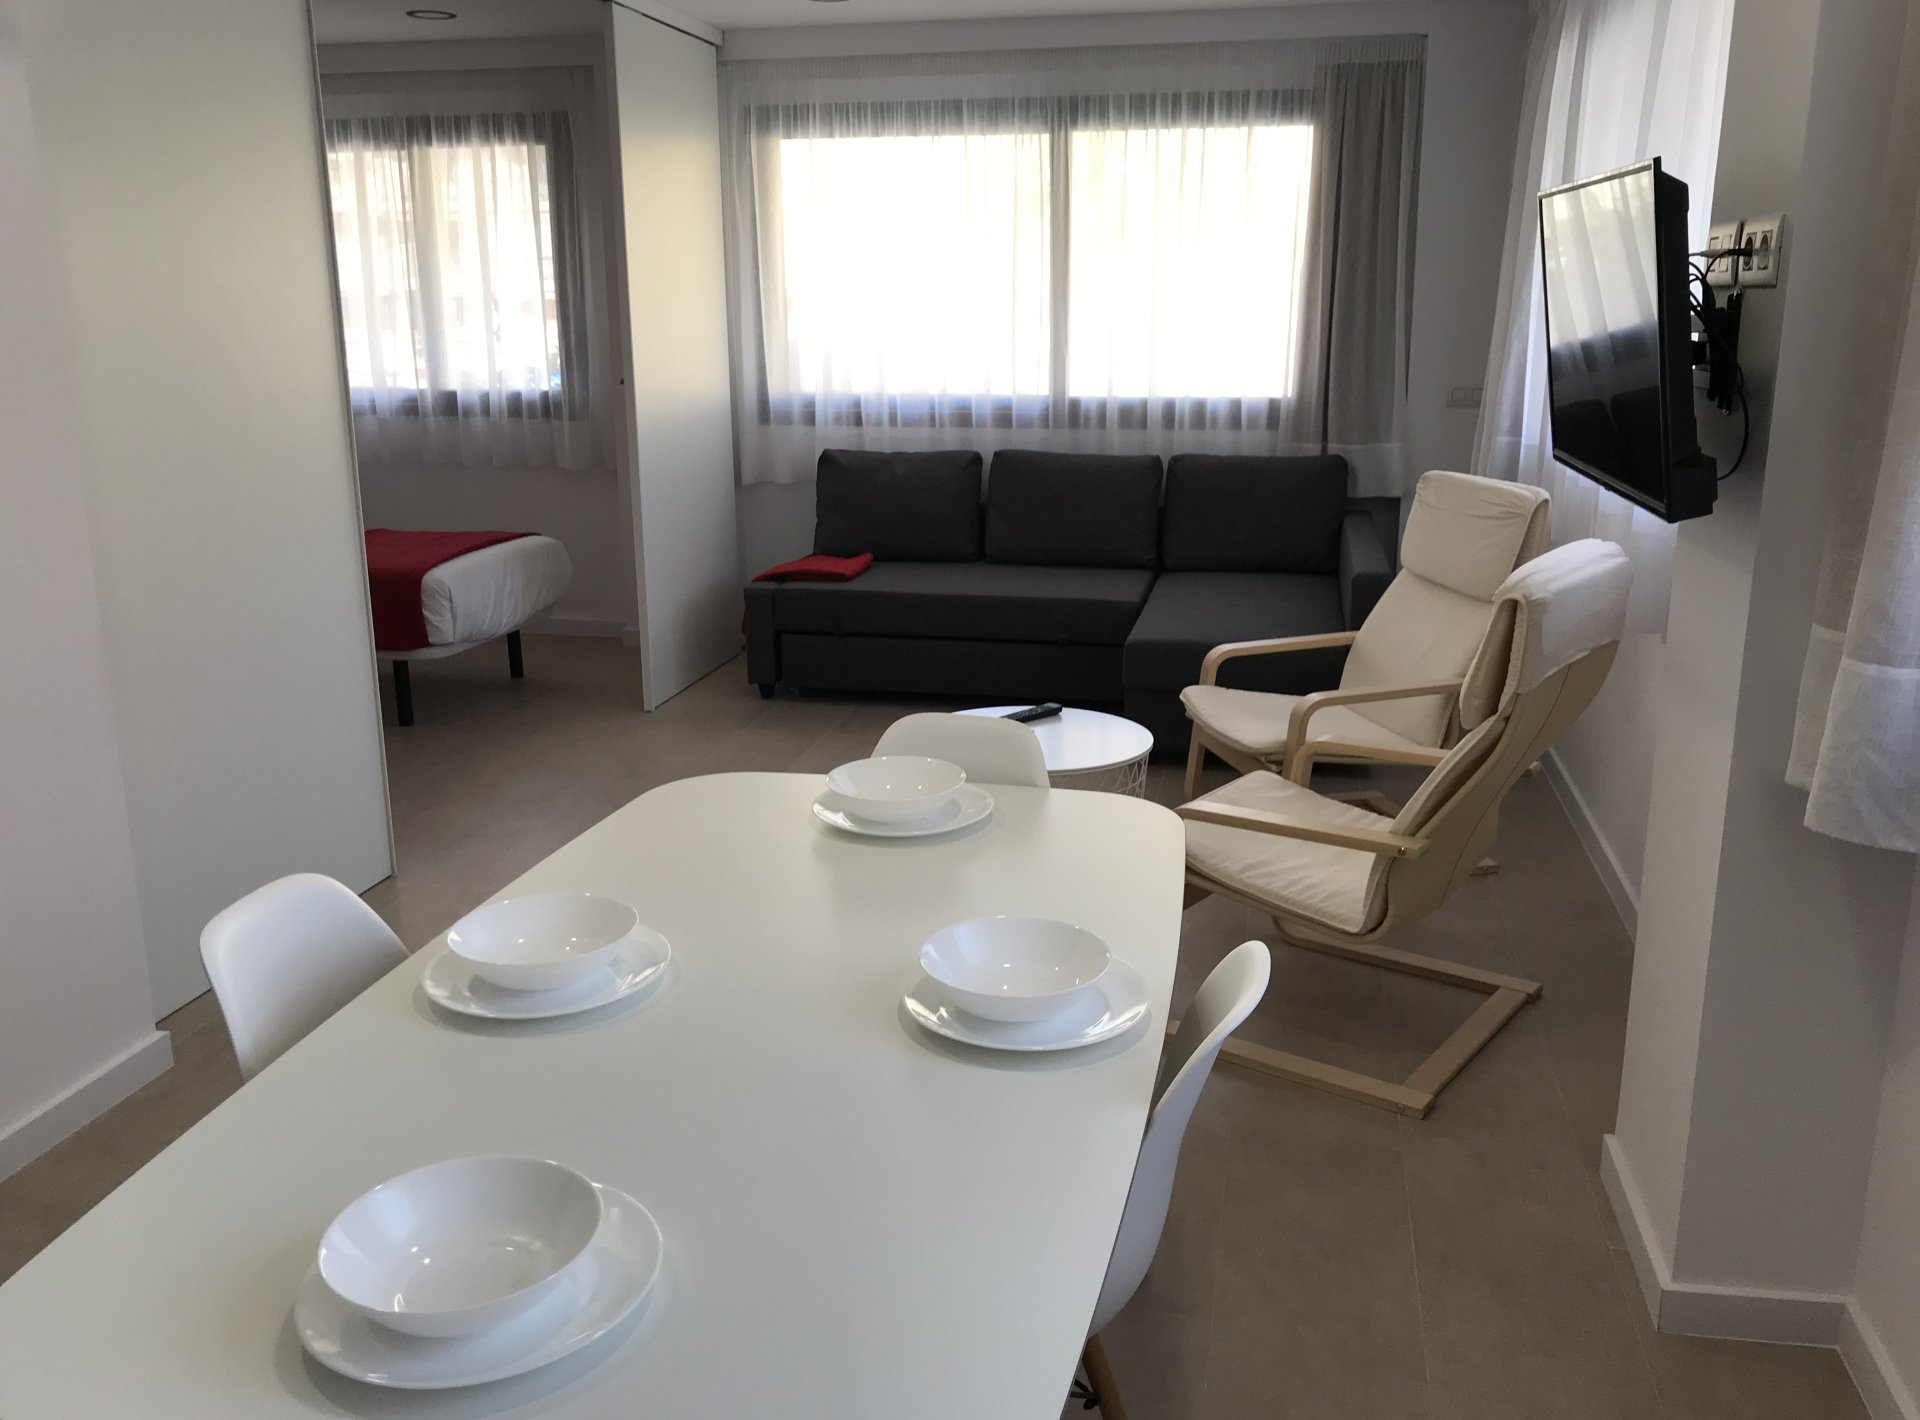 REIG 6. 1 Bedroom Apartment up to 4 people. Valencia